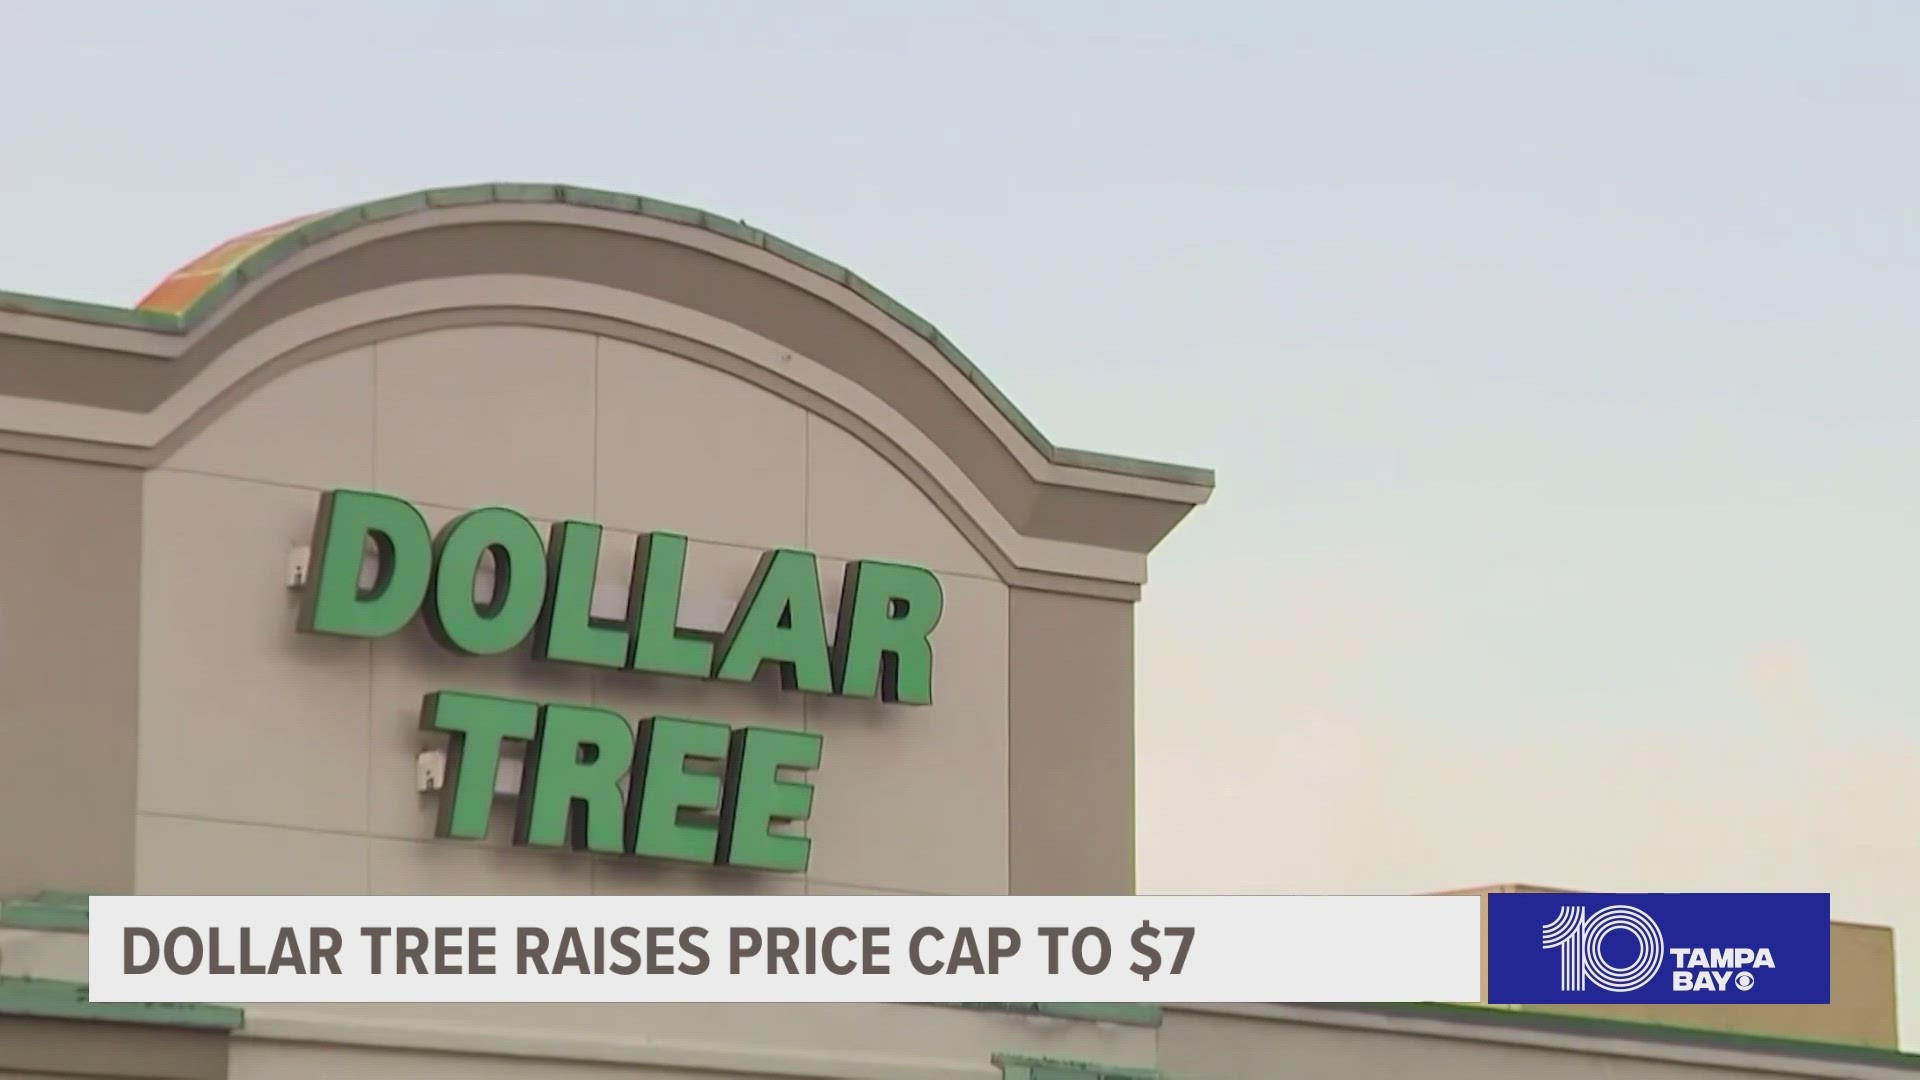 Dollar Tree previously capped their max price at $5 in June.